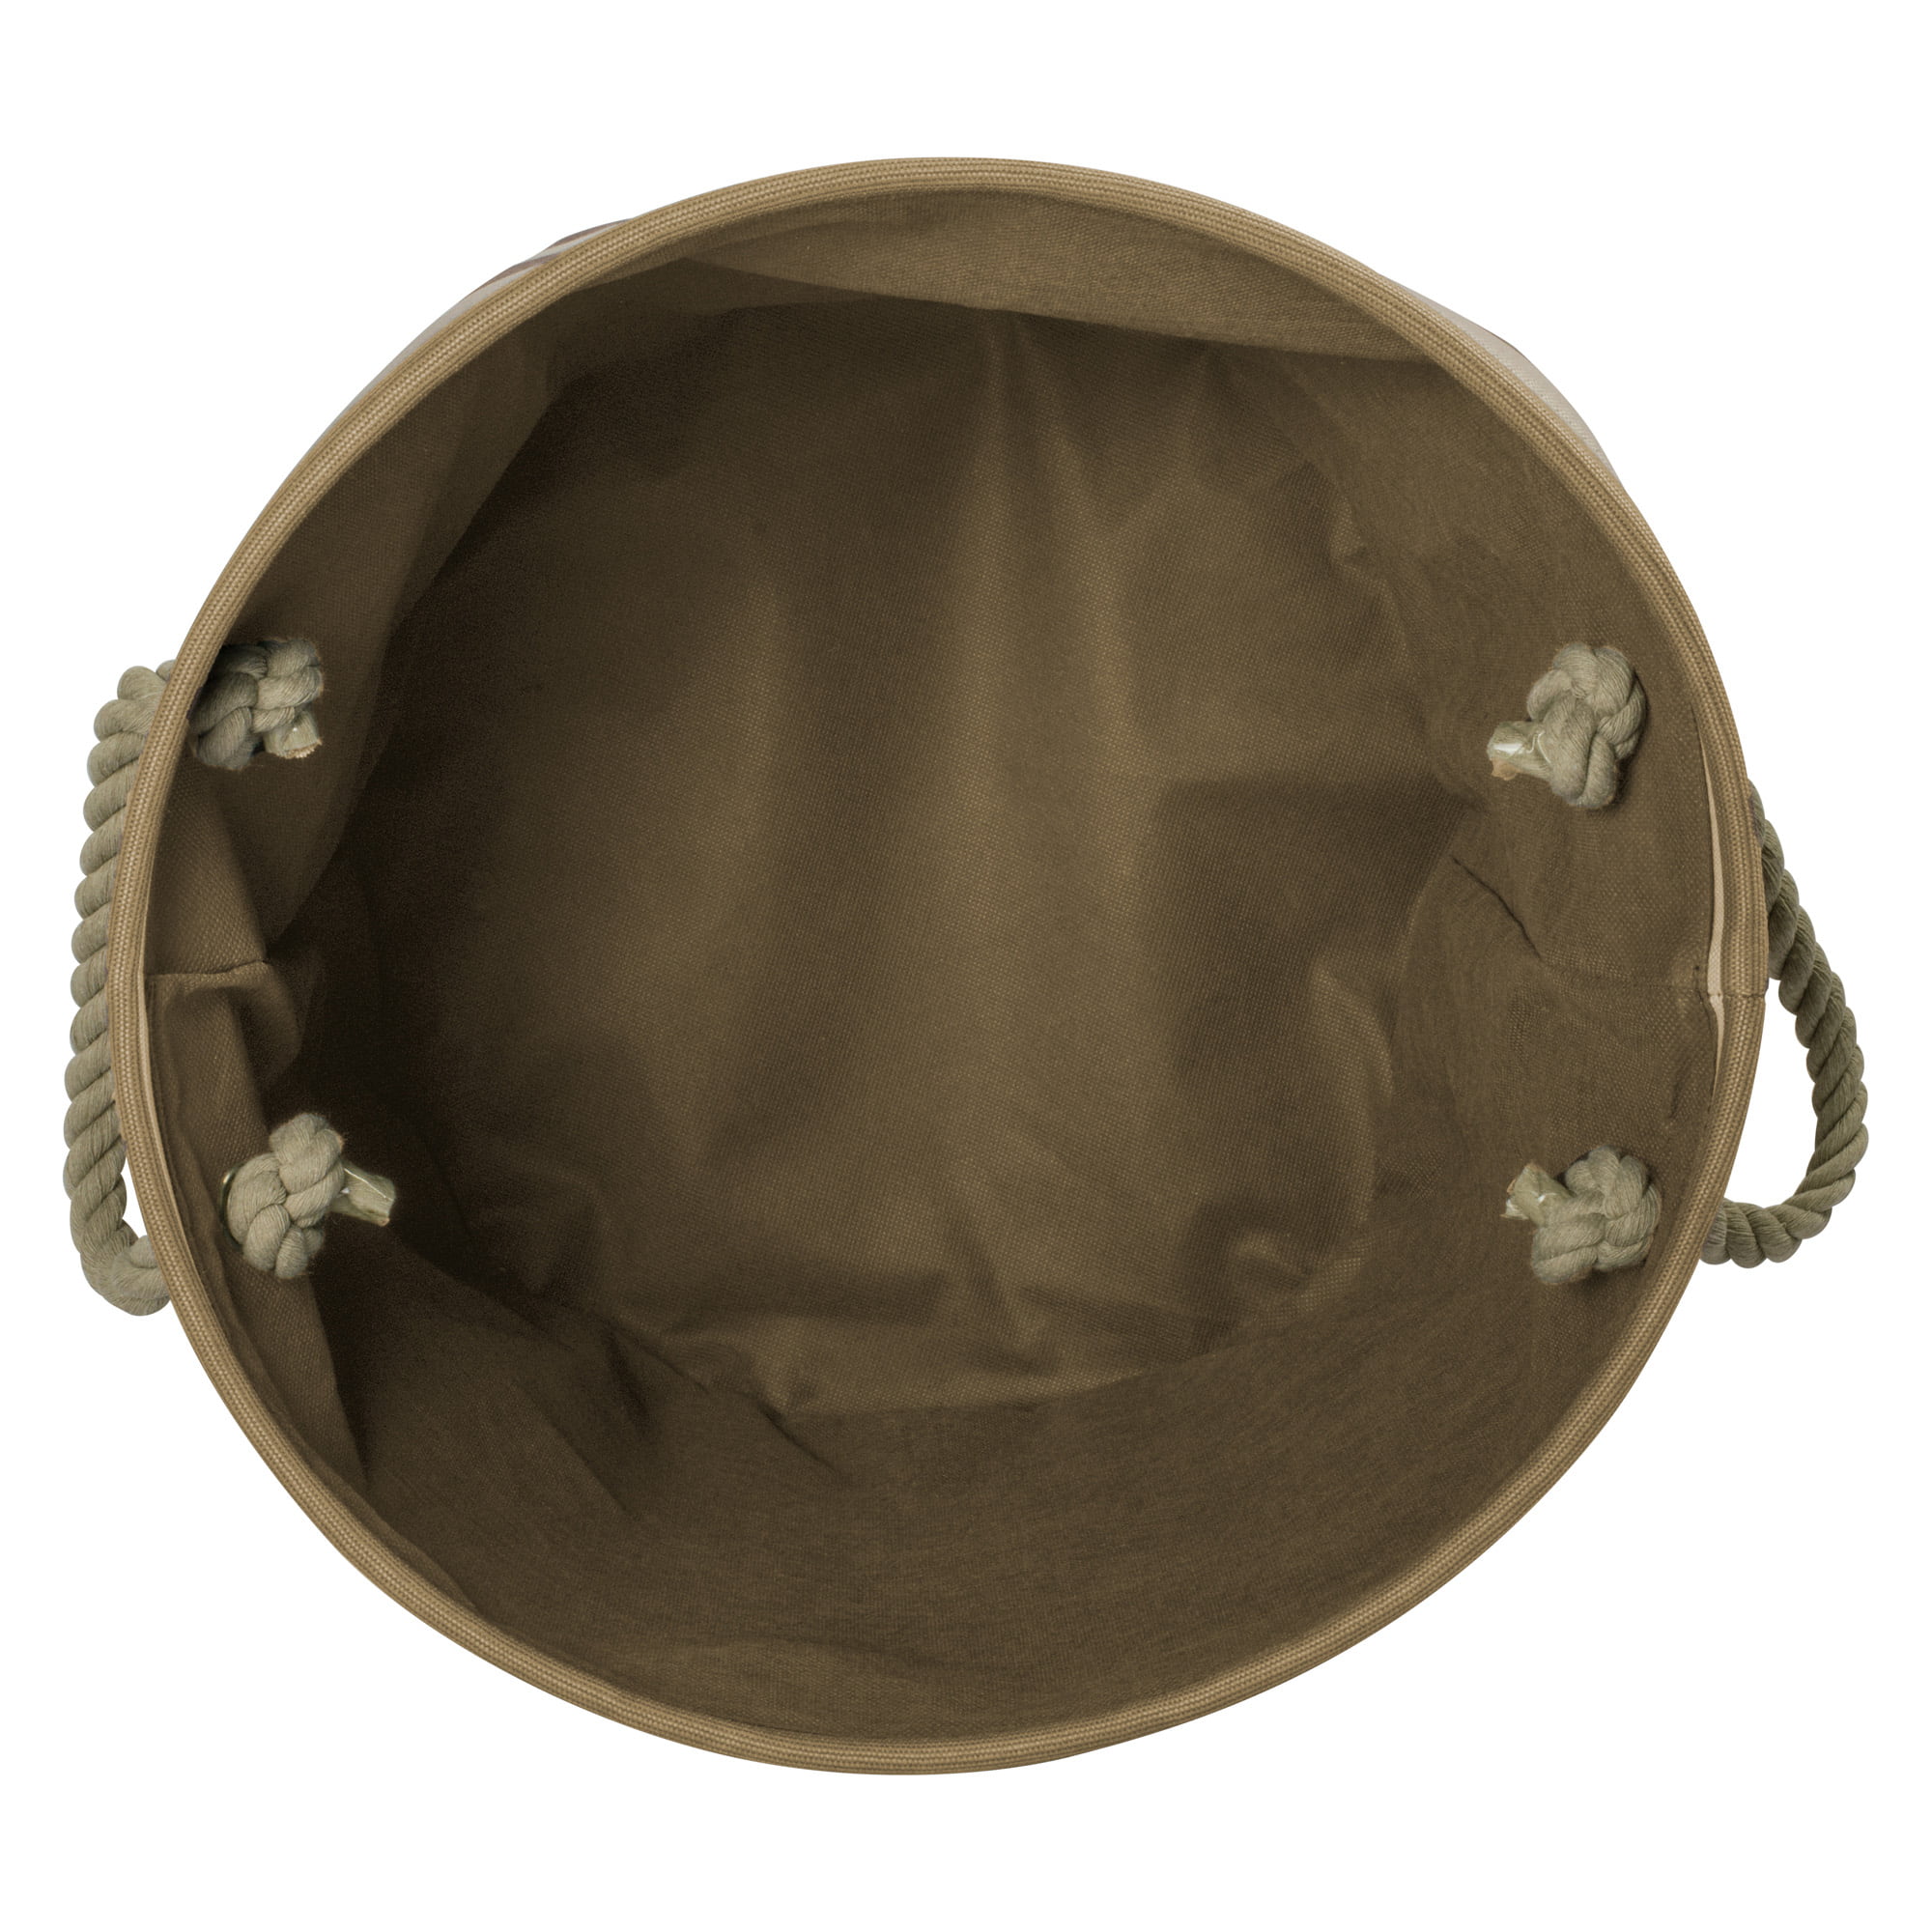 Design Imports Camz37210 9 X 12 X 12 In. Polyester Pet Round Storage Bin Stripe With Paw Patch, Brown - Small